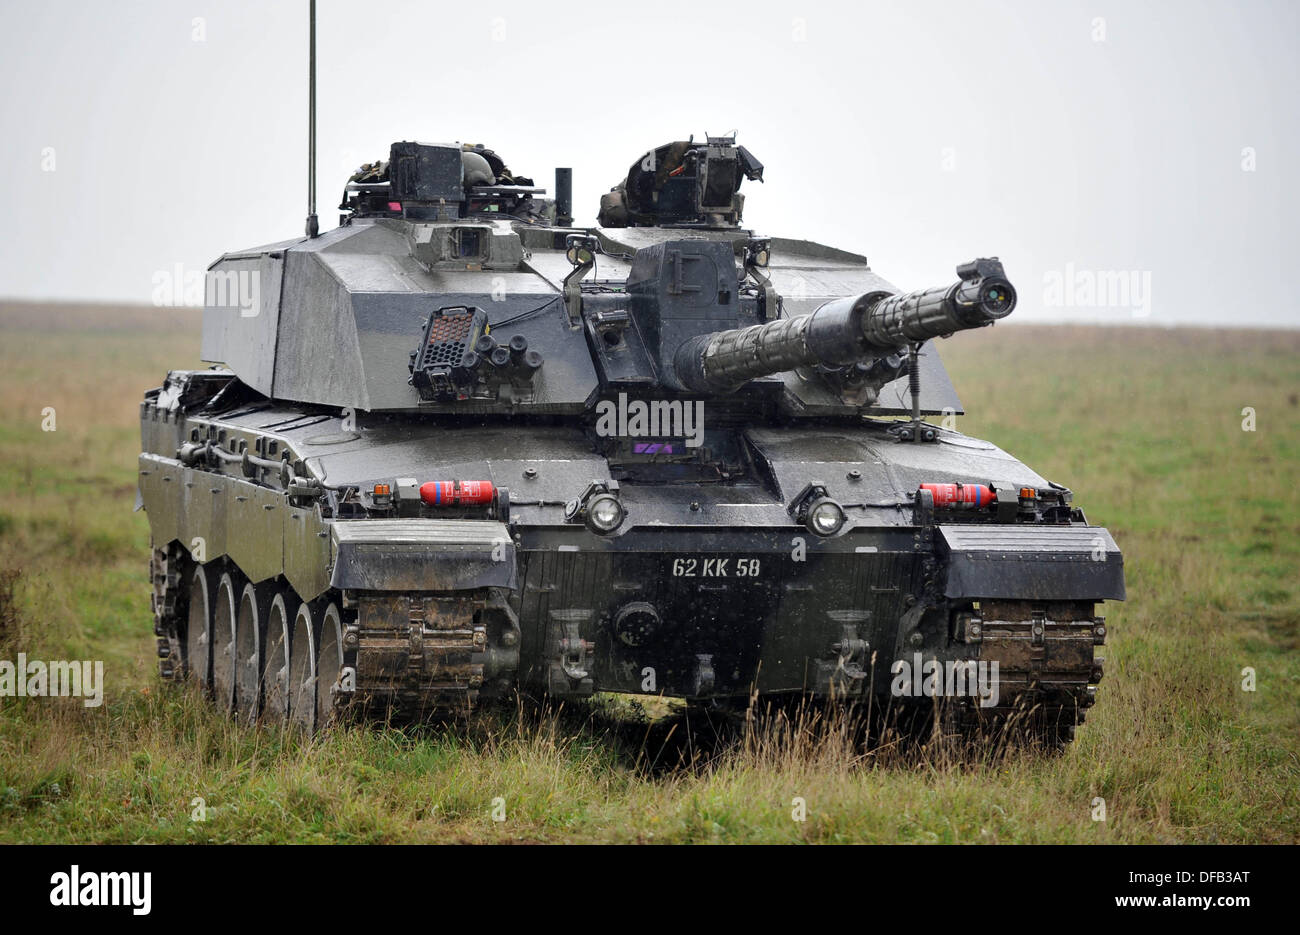 Challenger Mk ll battle tank. British Army reserve units training with the full time regular regiments, in this case the Royal Kings Hussars who are a tank regiment and operate Challenger Mk ll 60 tonne battle tanks. Salisbury Plain, UK. Stock Photo